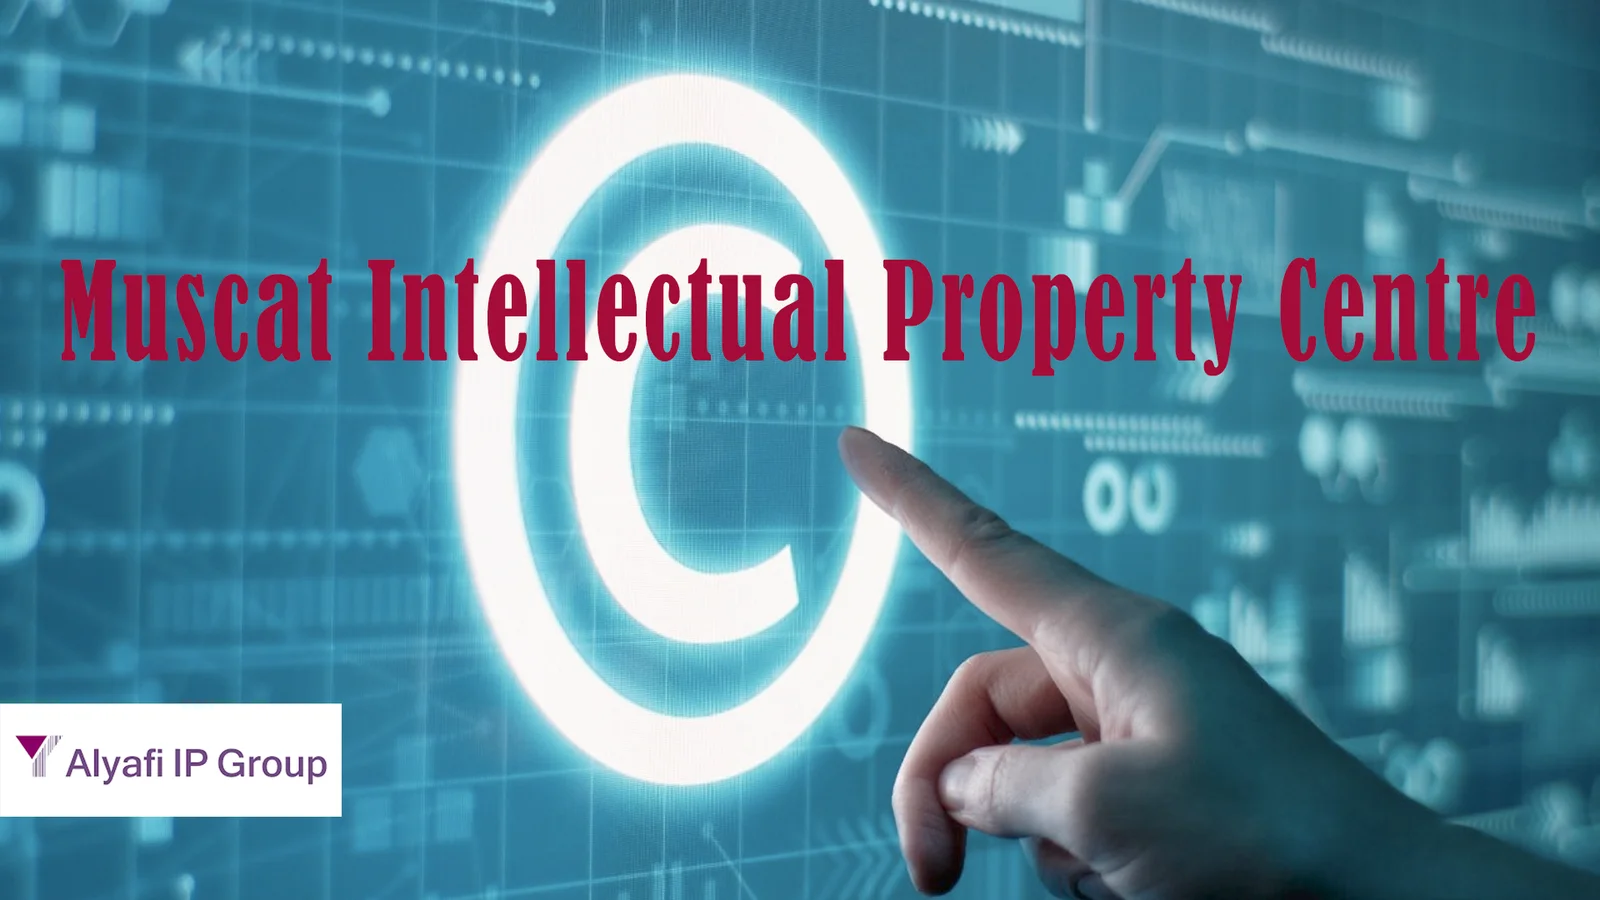 Muscat Intellectual Property Centre